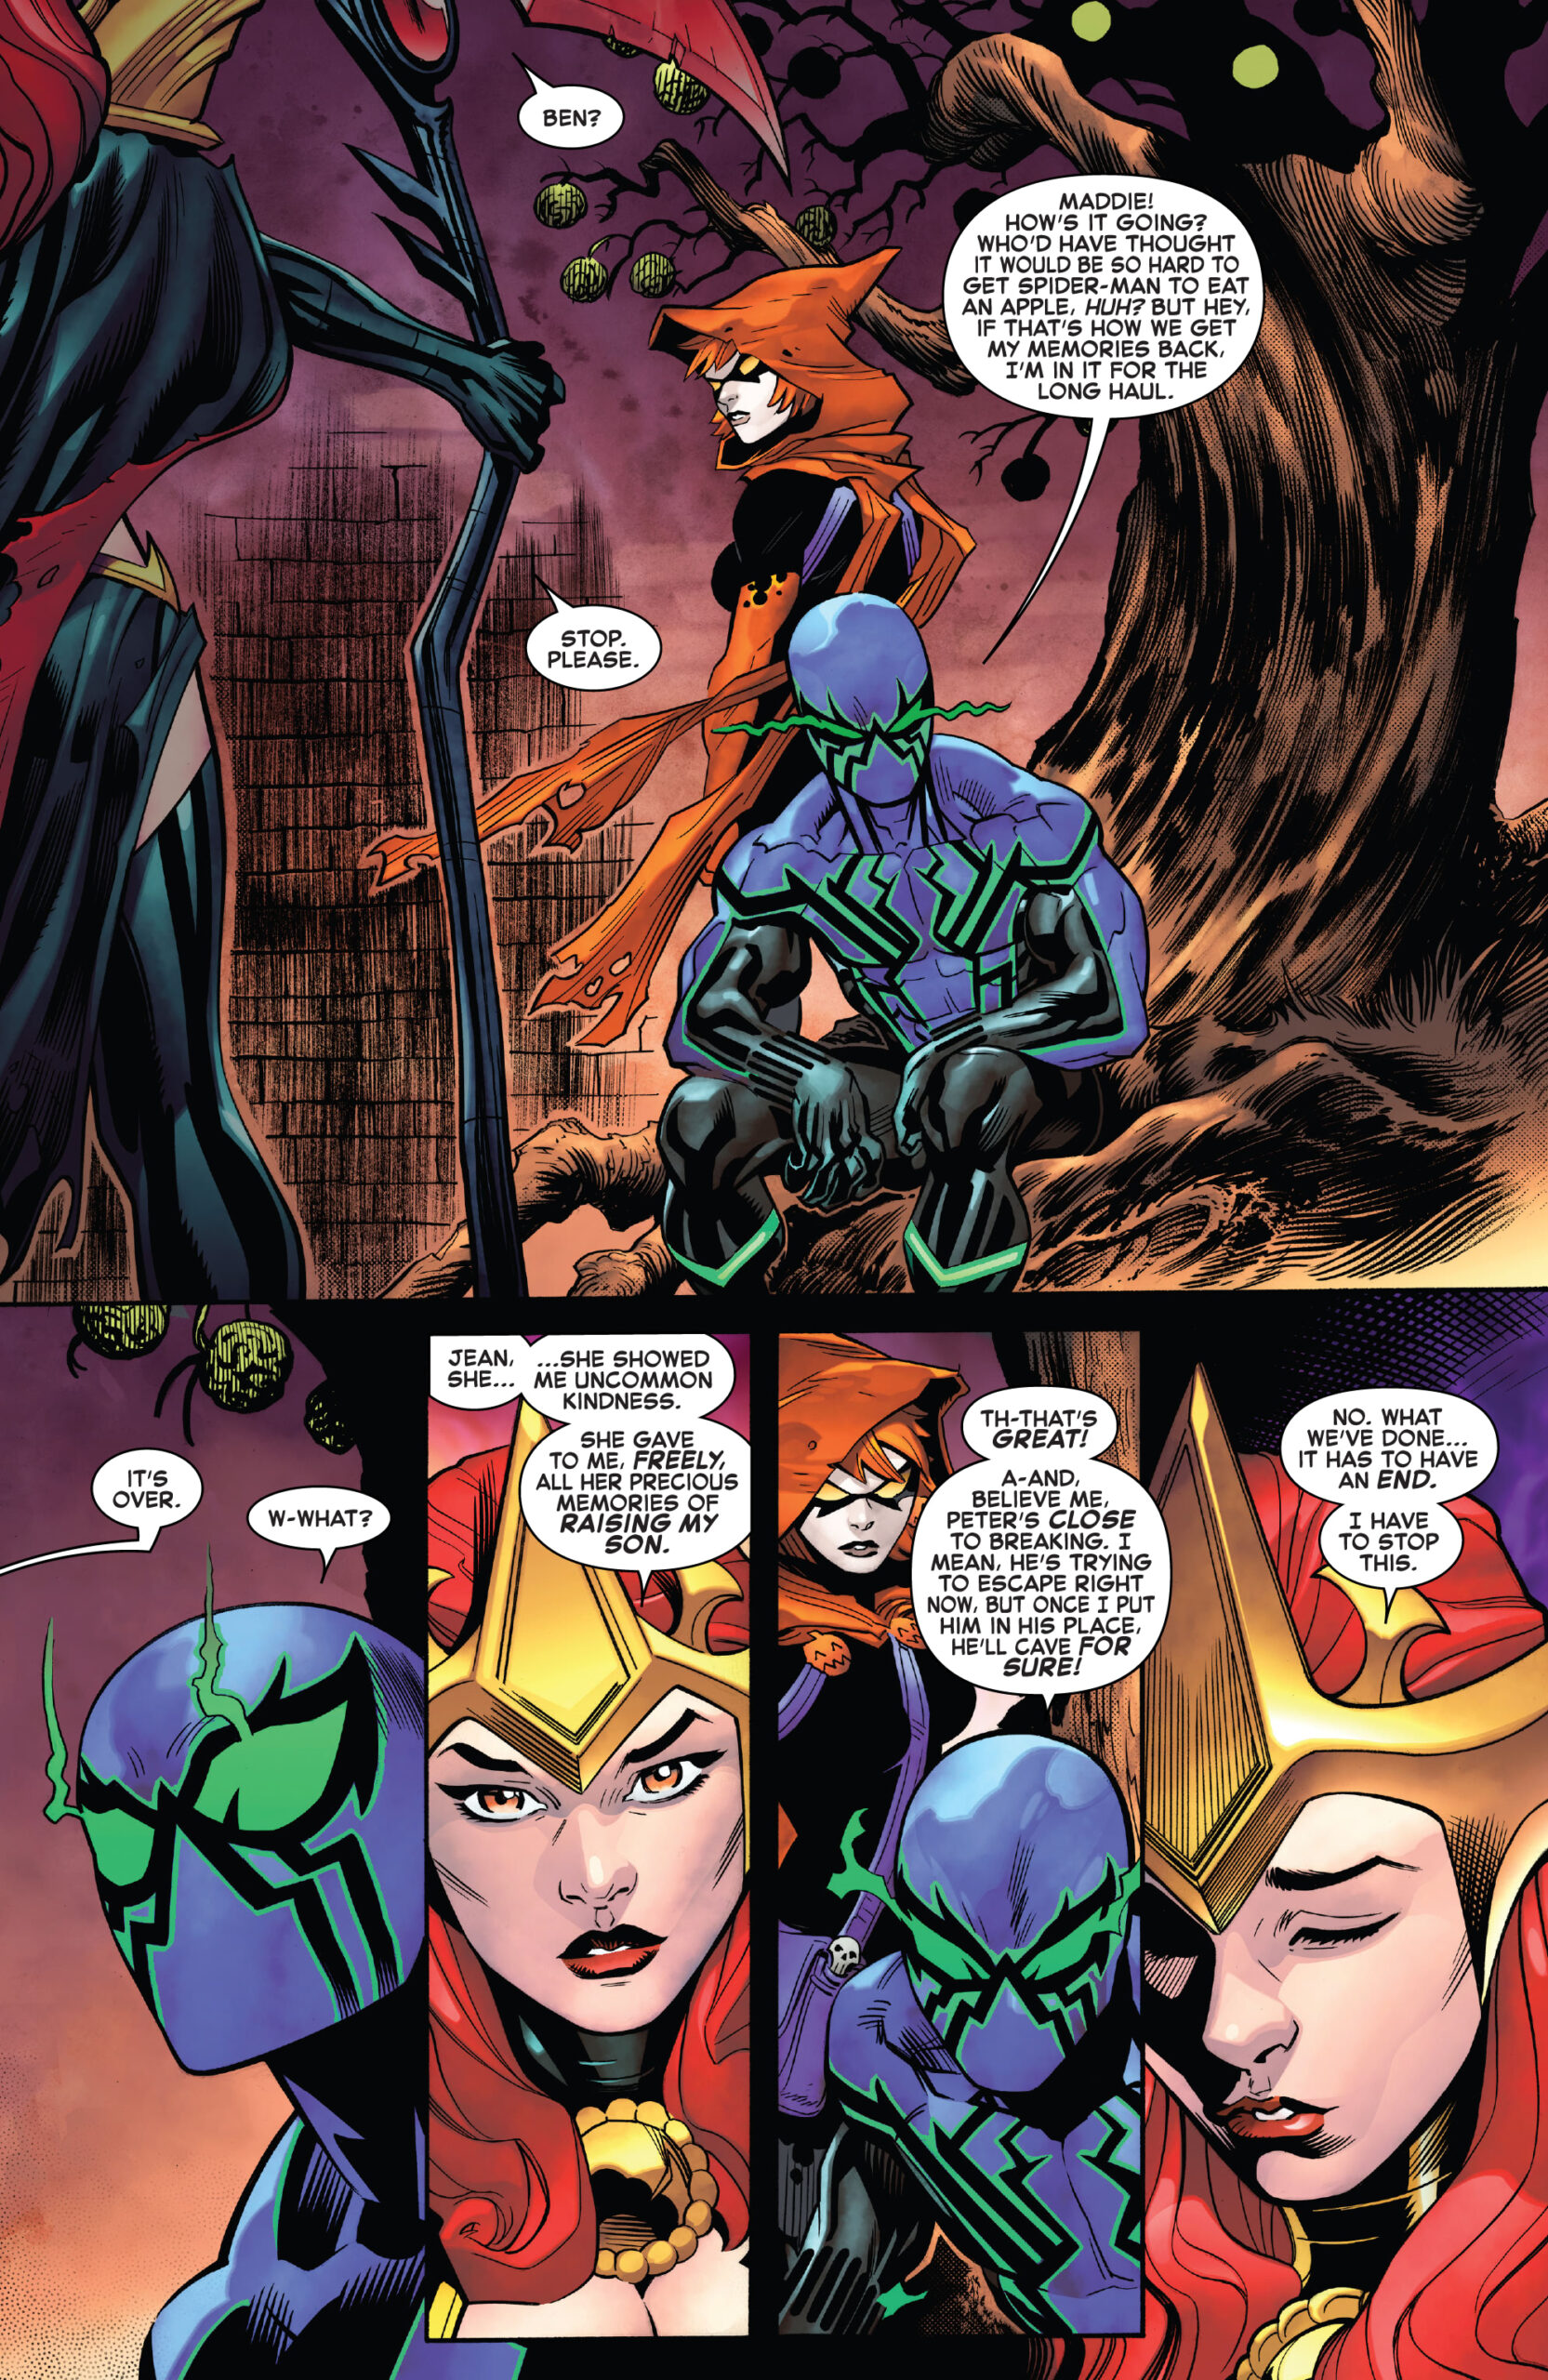 Amazing Spider-Man #18 spoilers 2 Goblin Queen Chasm Hallows' Eve